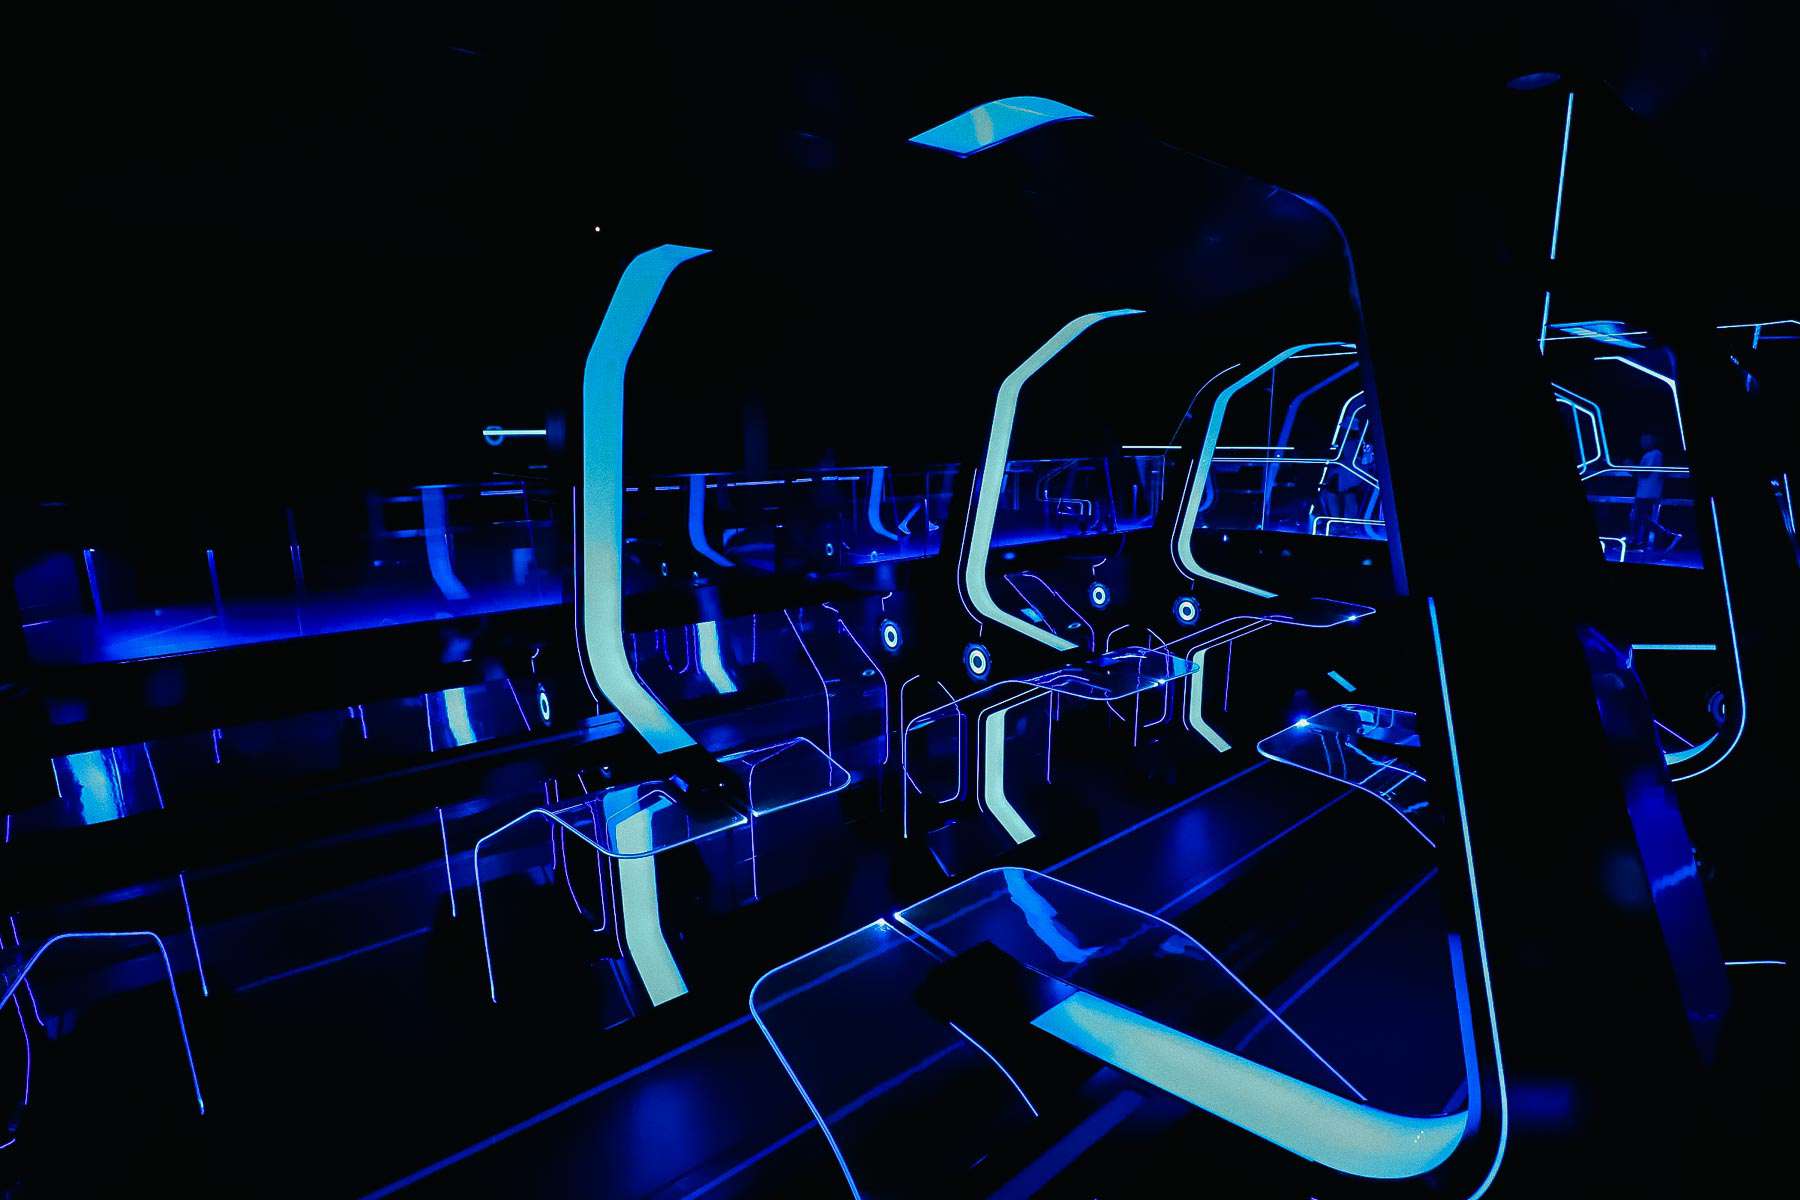 Tron frame before the initial ride launch. 